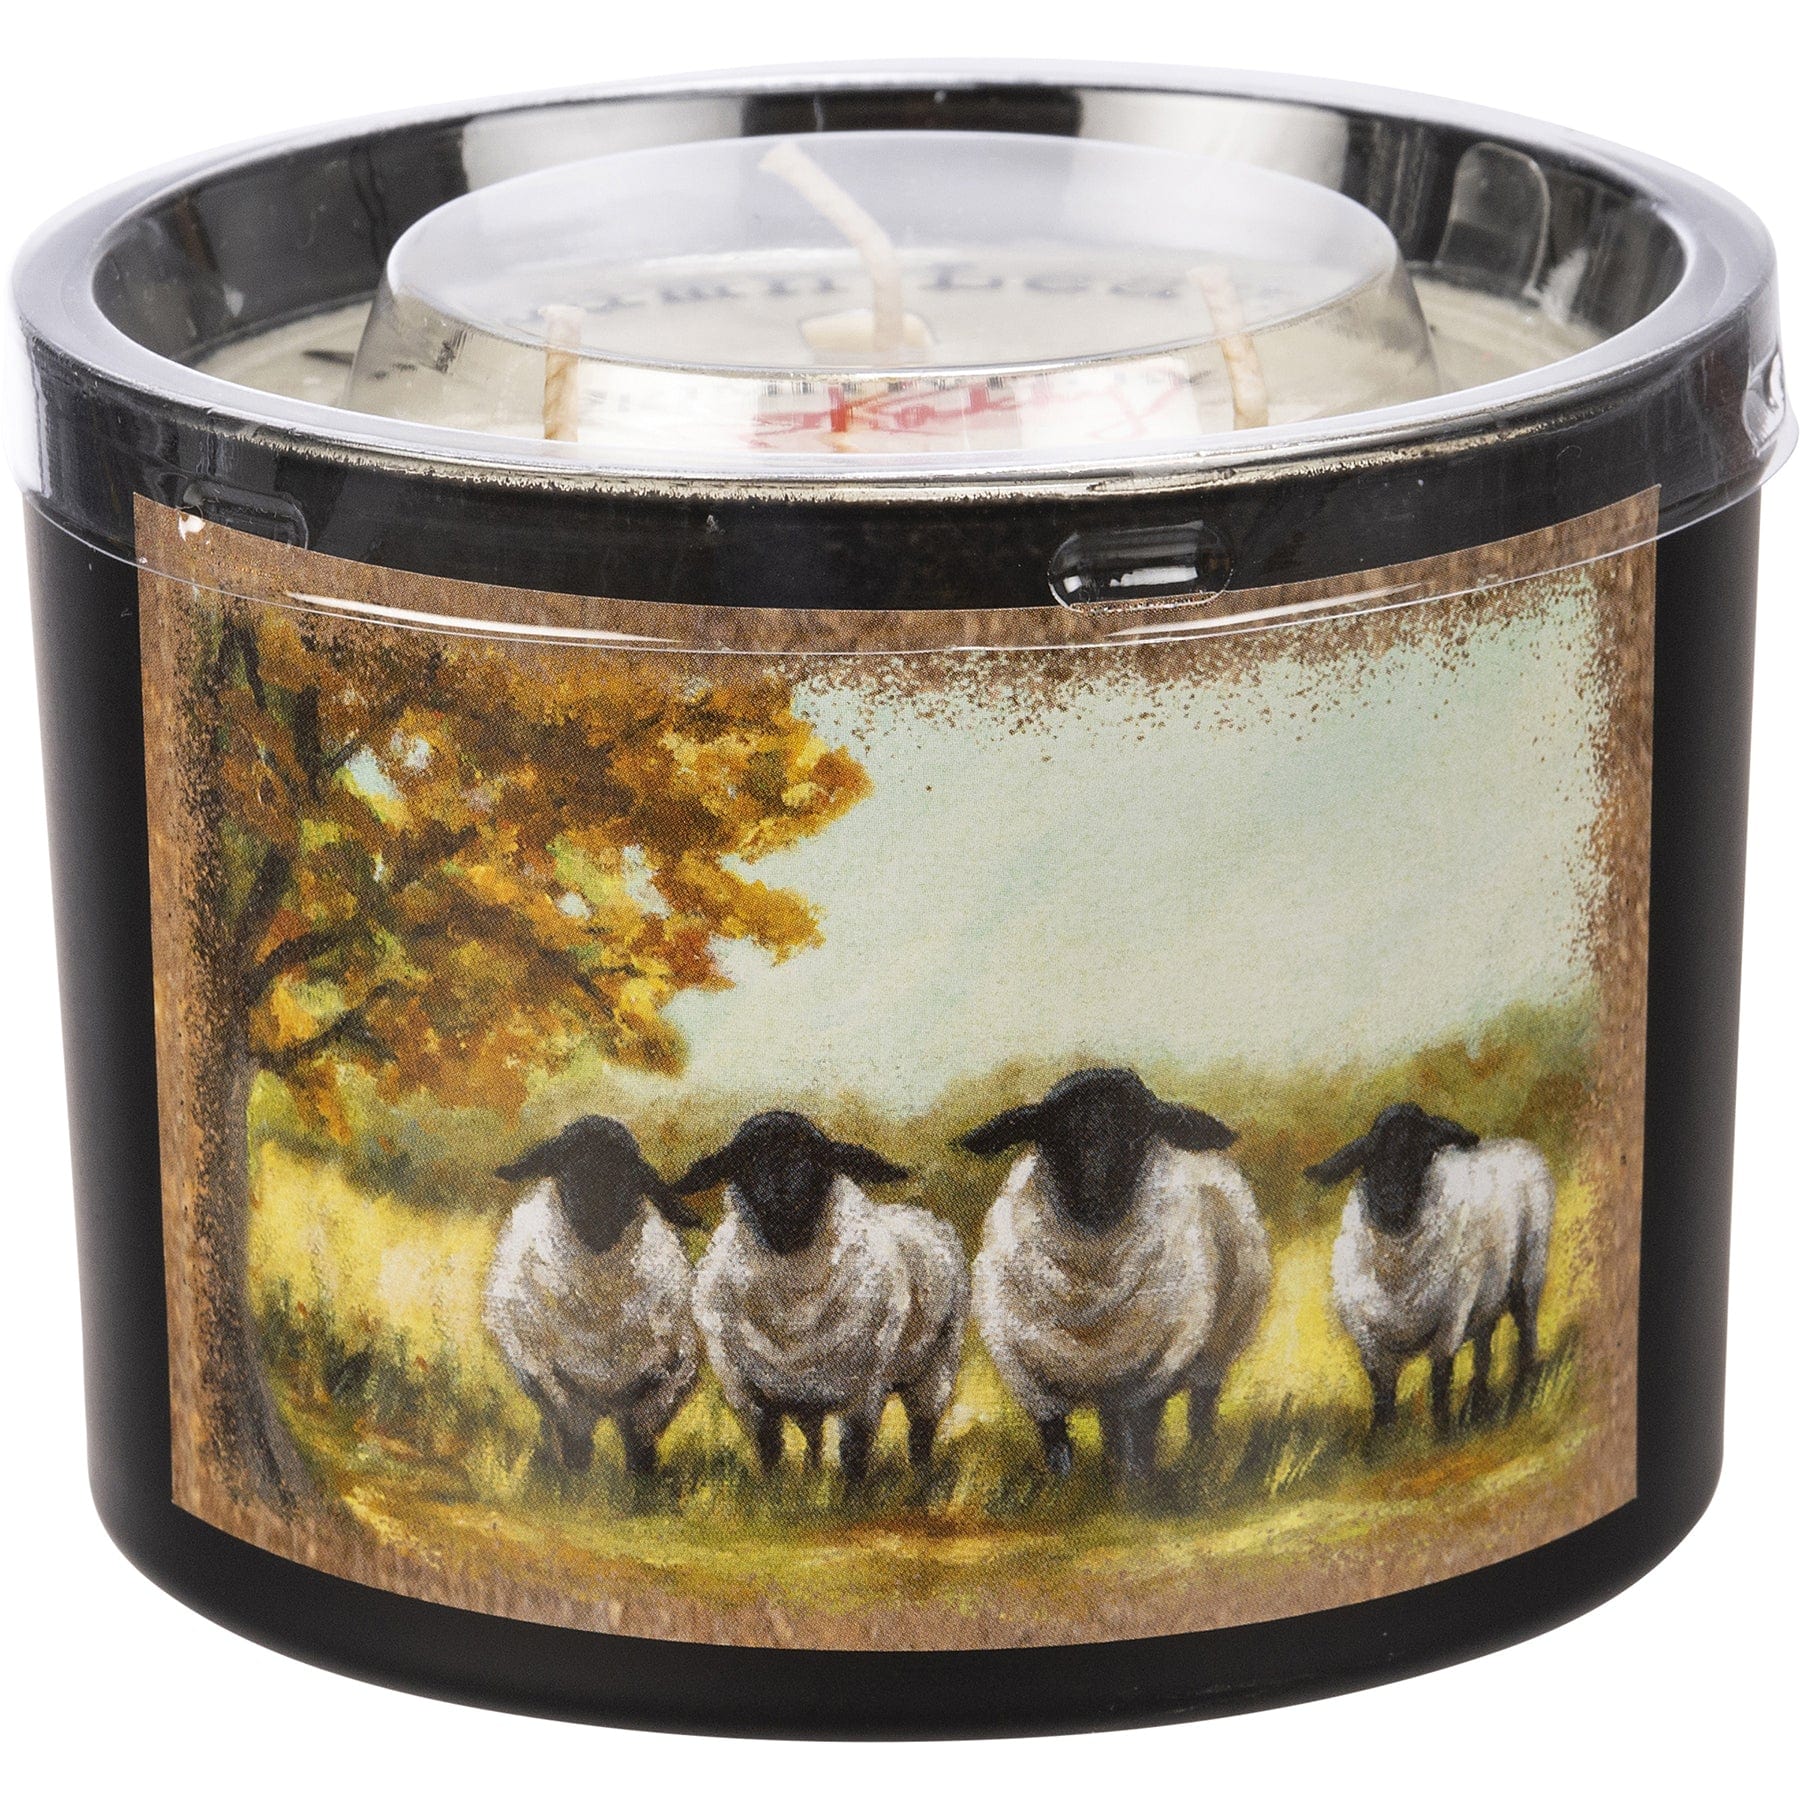 Candles Jar Candle - Fall Sheep - Autumn Leaves PBK-110874